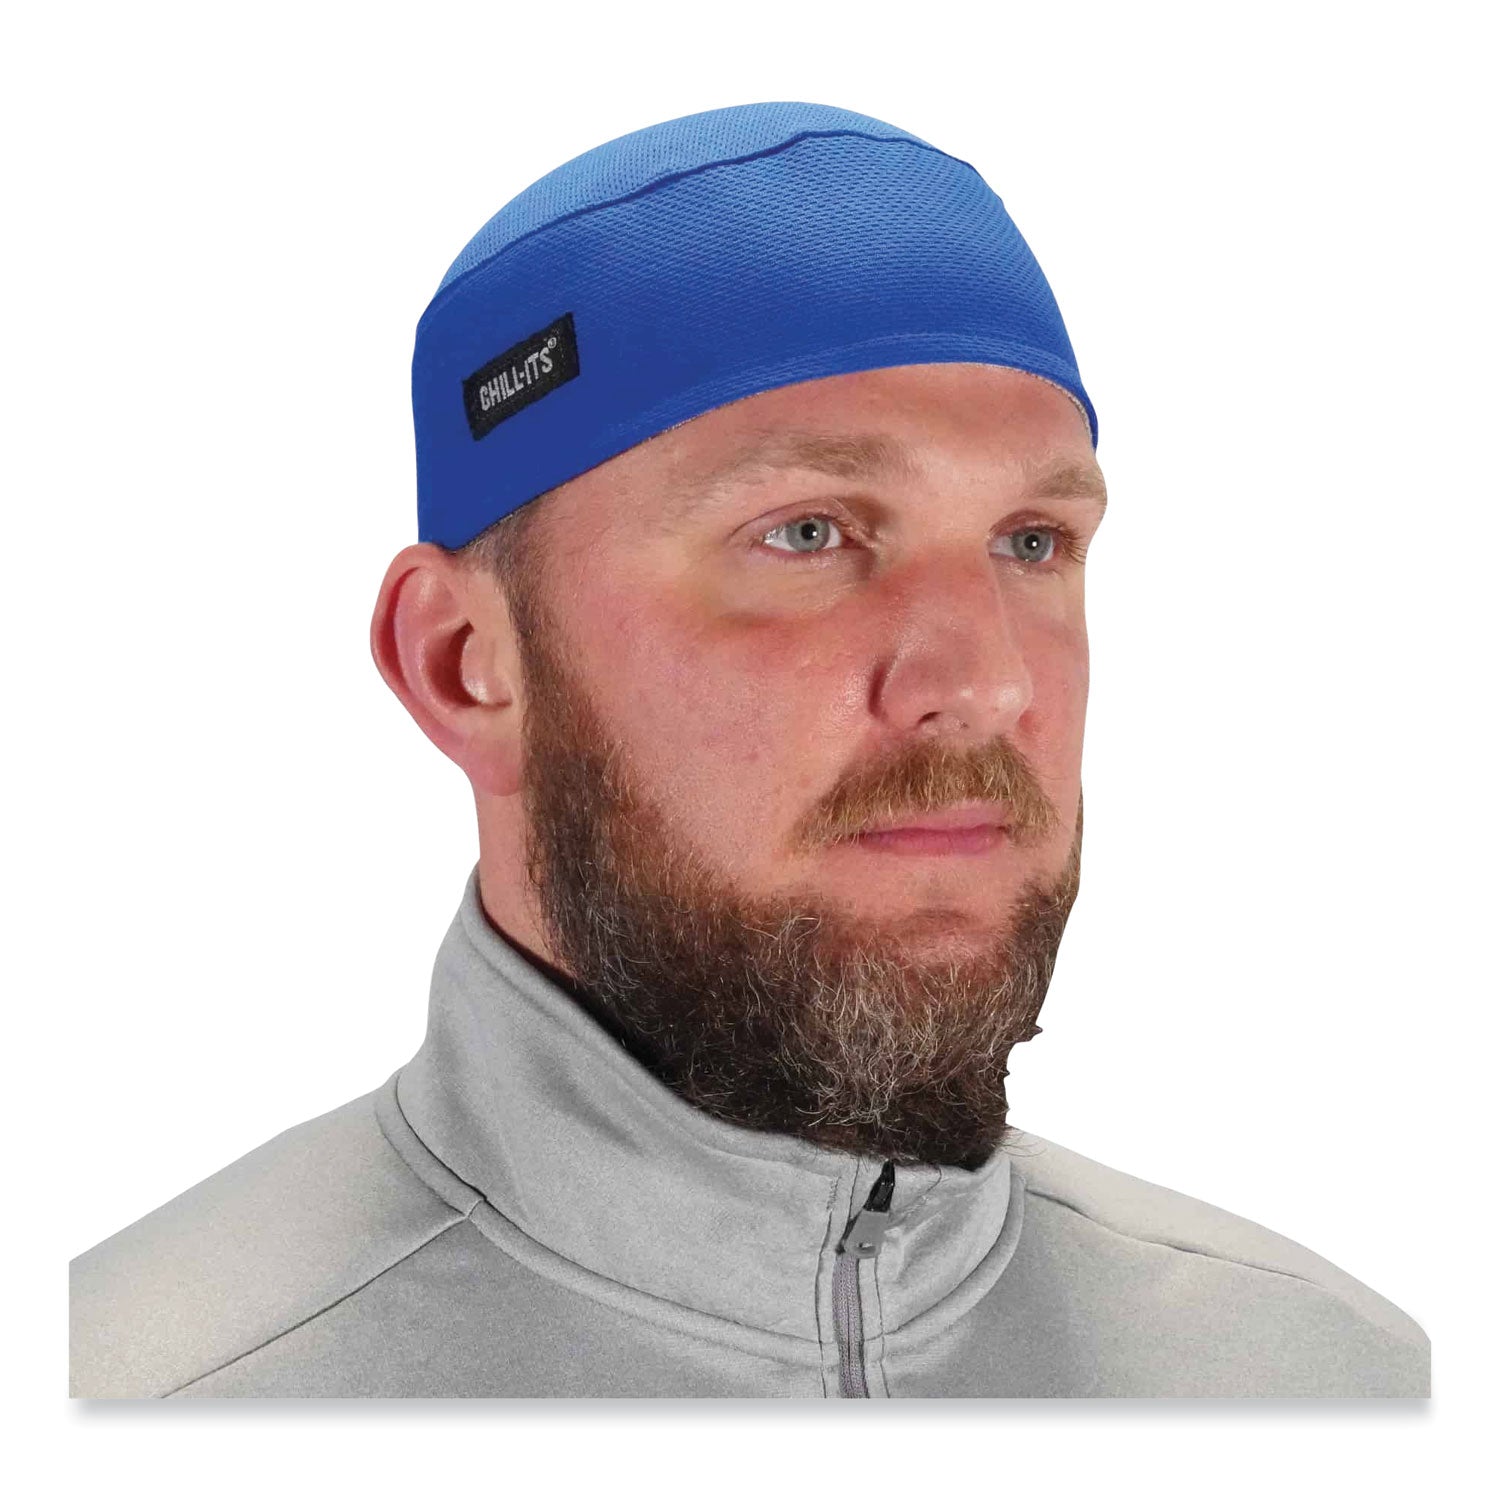 chill-its-6630-high-performance-terry-cloth-skull-cap-polyester-one-size-fits-most-blue-ships-in-1-3-business-days_ego12510 - 6